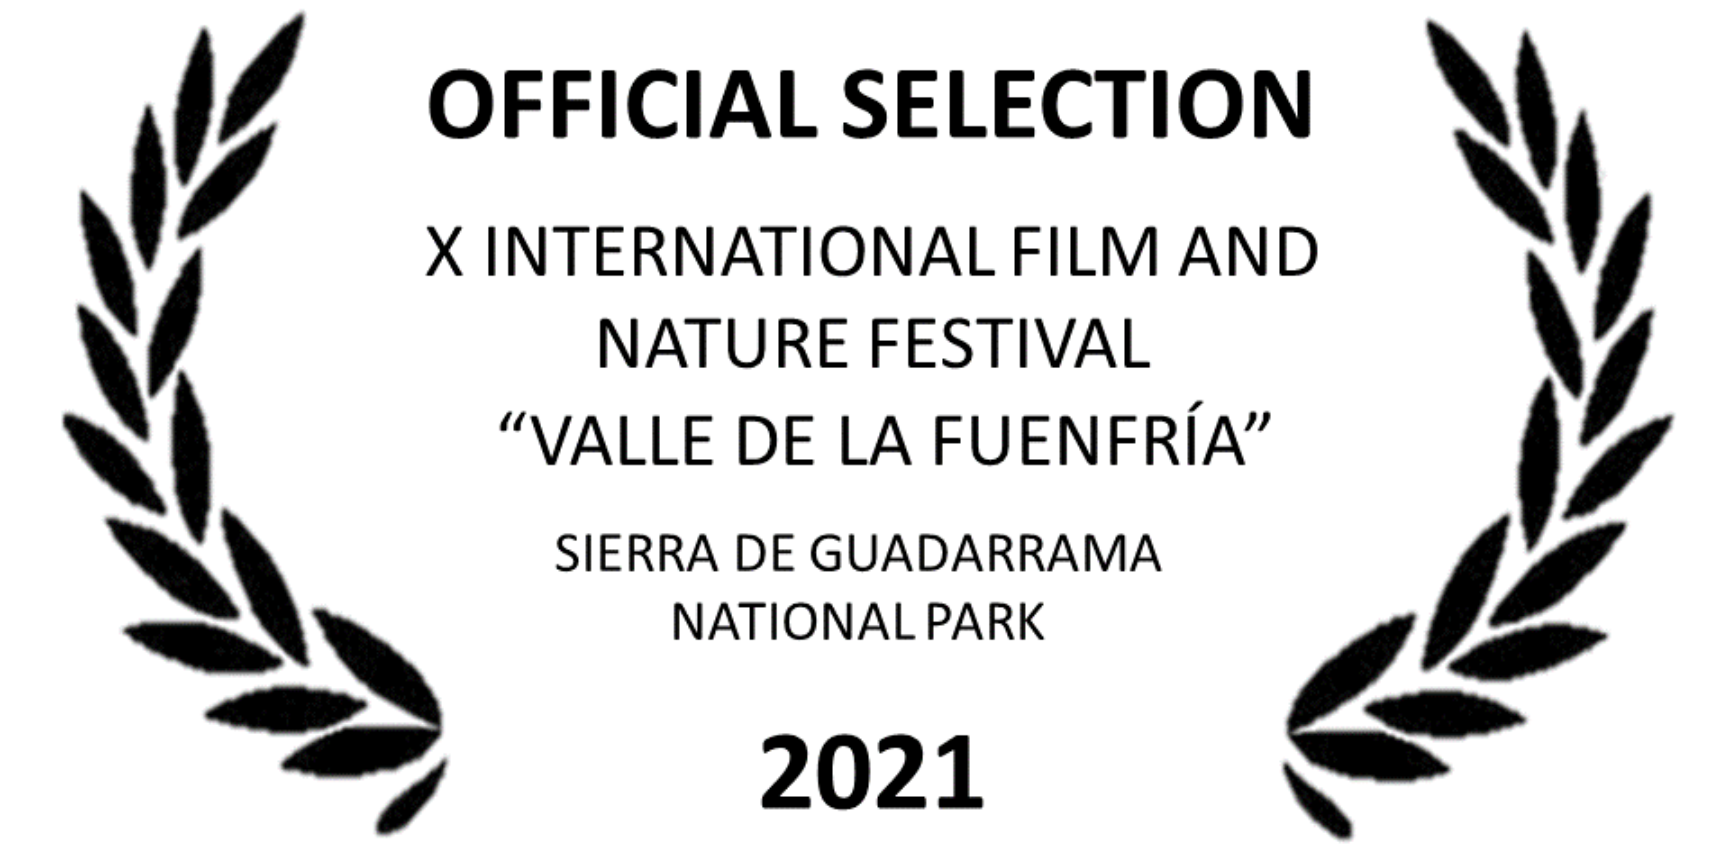 X international filmn and nature festival official selection